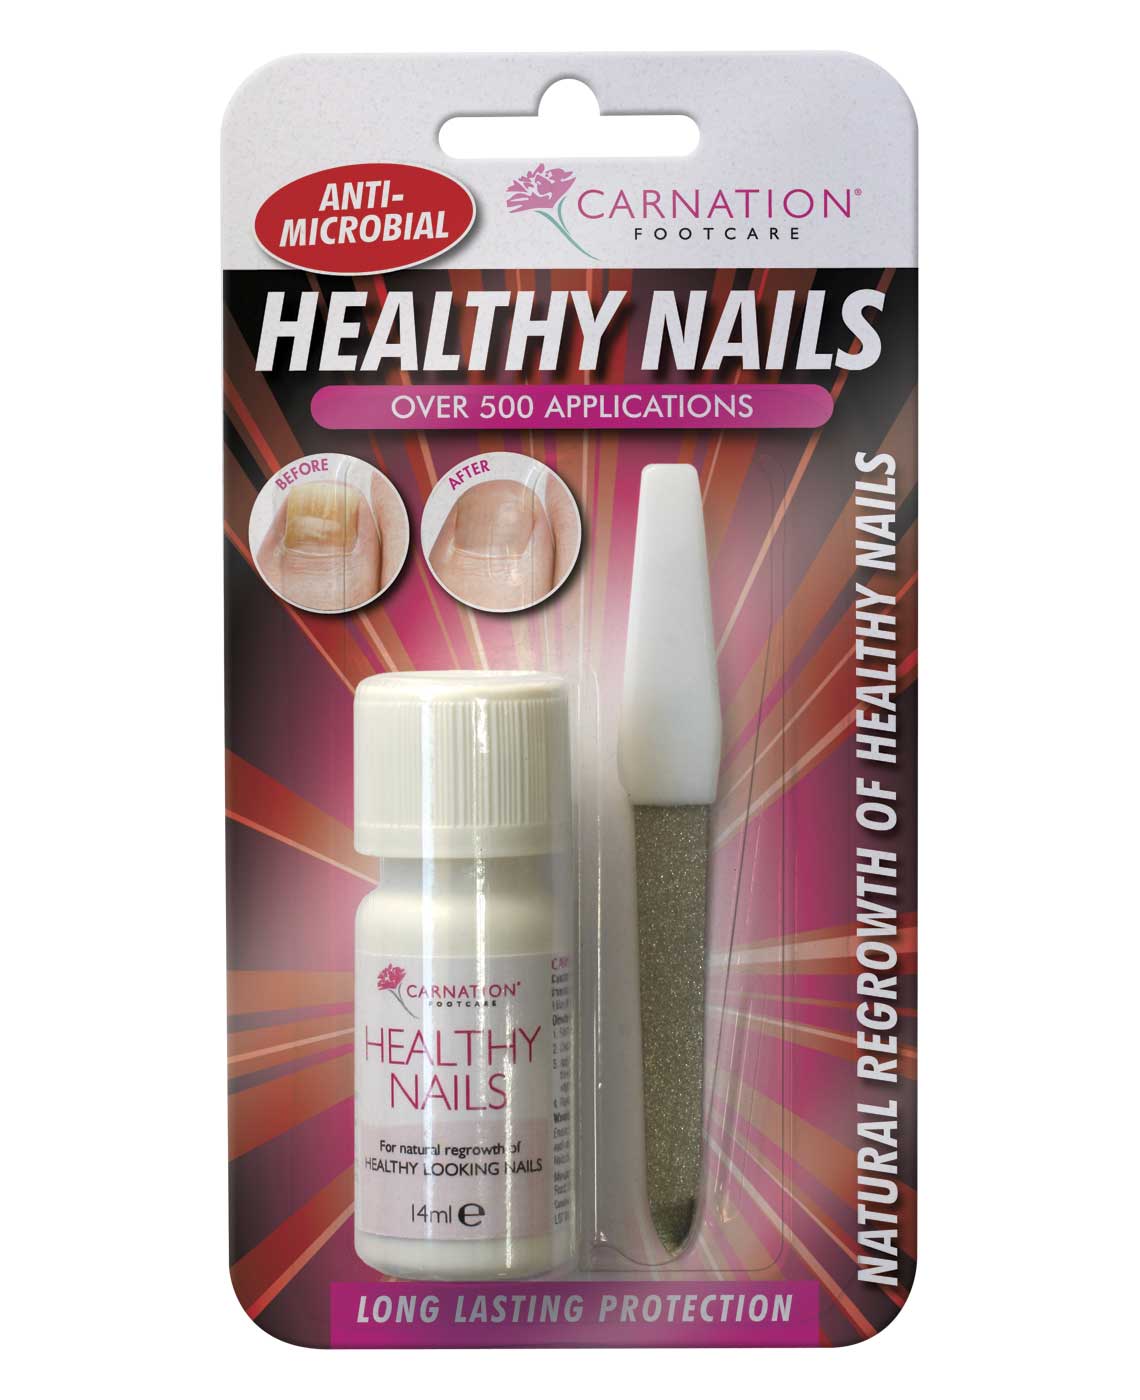 Healthy Nails Lotion | First Aid Fast